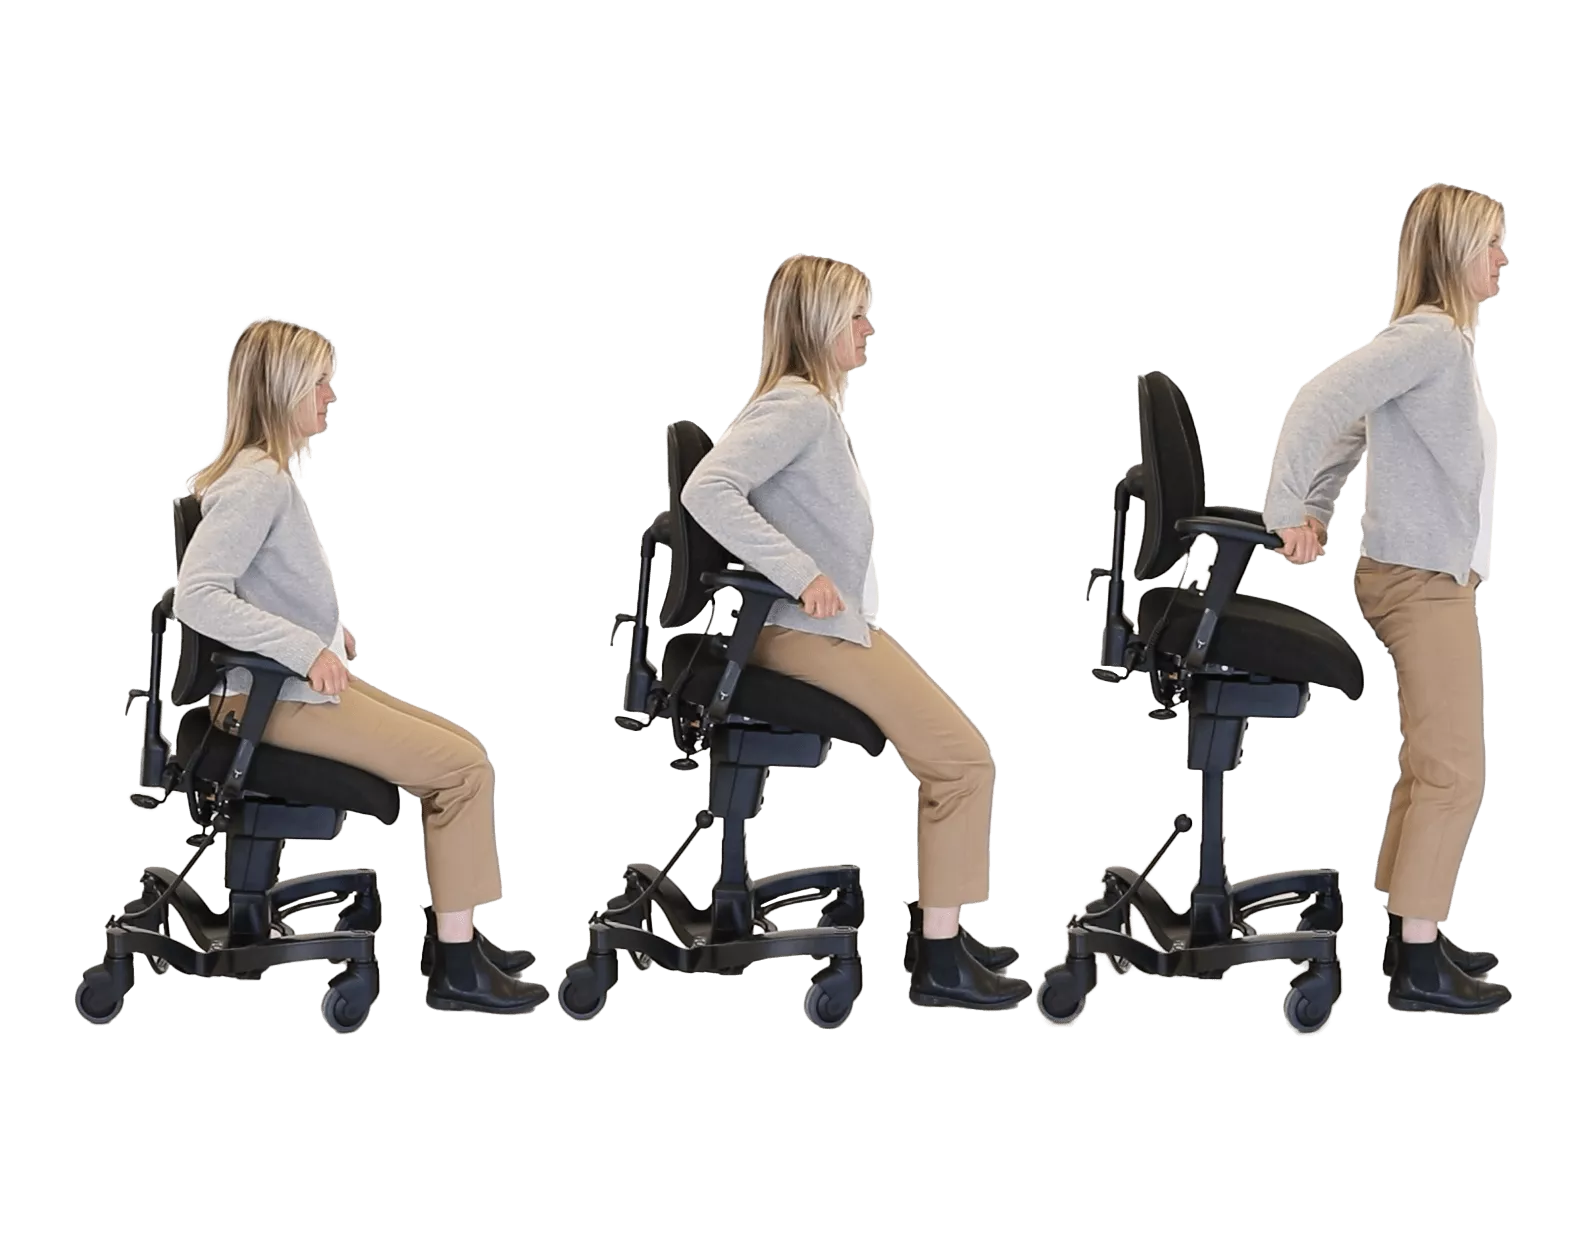 Woman performing a sit to stand motion with the VELA 700e mobility chair for elderly and disabled users.